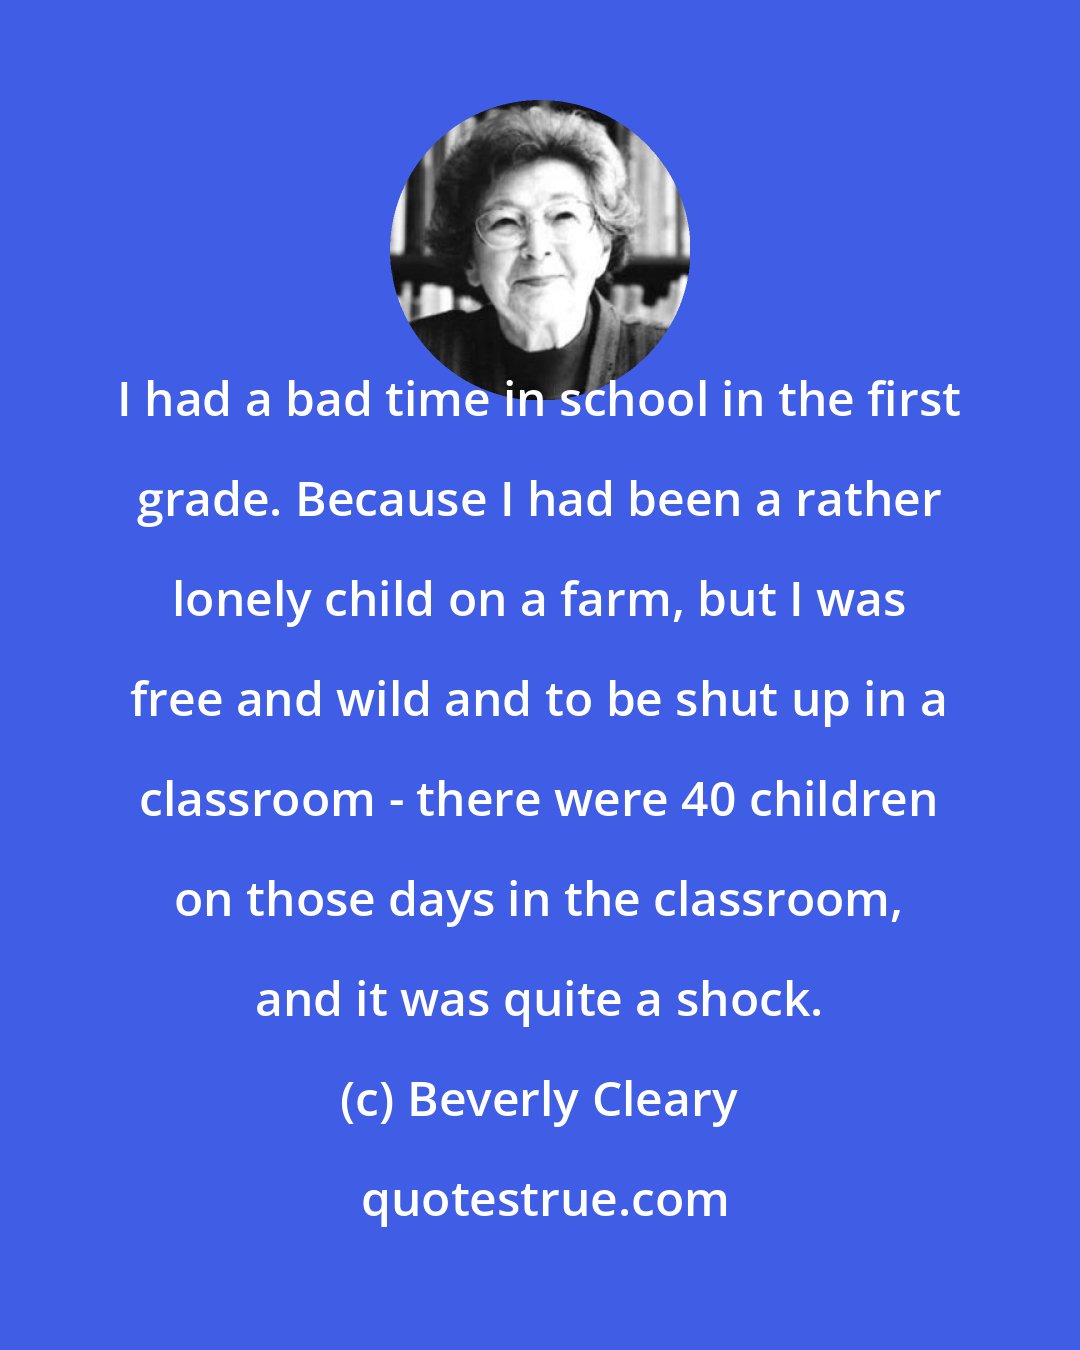 Beverly Cleary: I had a bad time in school in the first grade. Because I had been a rather lonely child on a farm, but I was free and wild and to be shut up in a classroom - there were 40 children on those days in the classroom, and it was quite a shock.